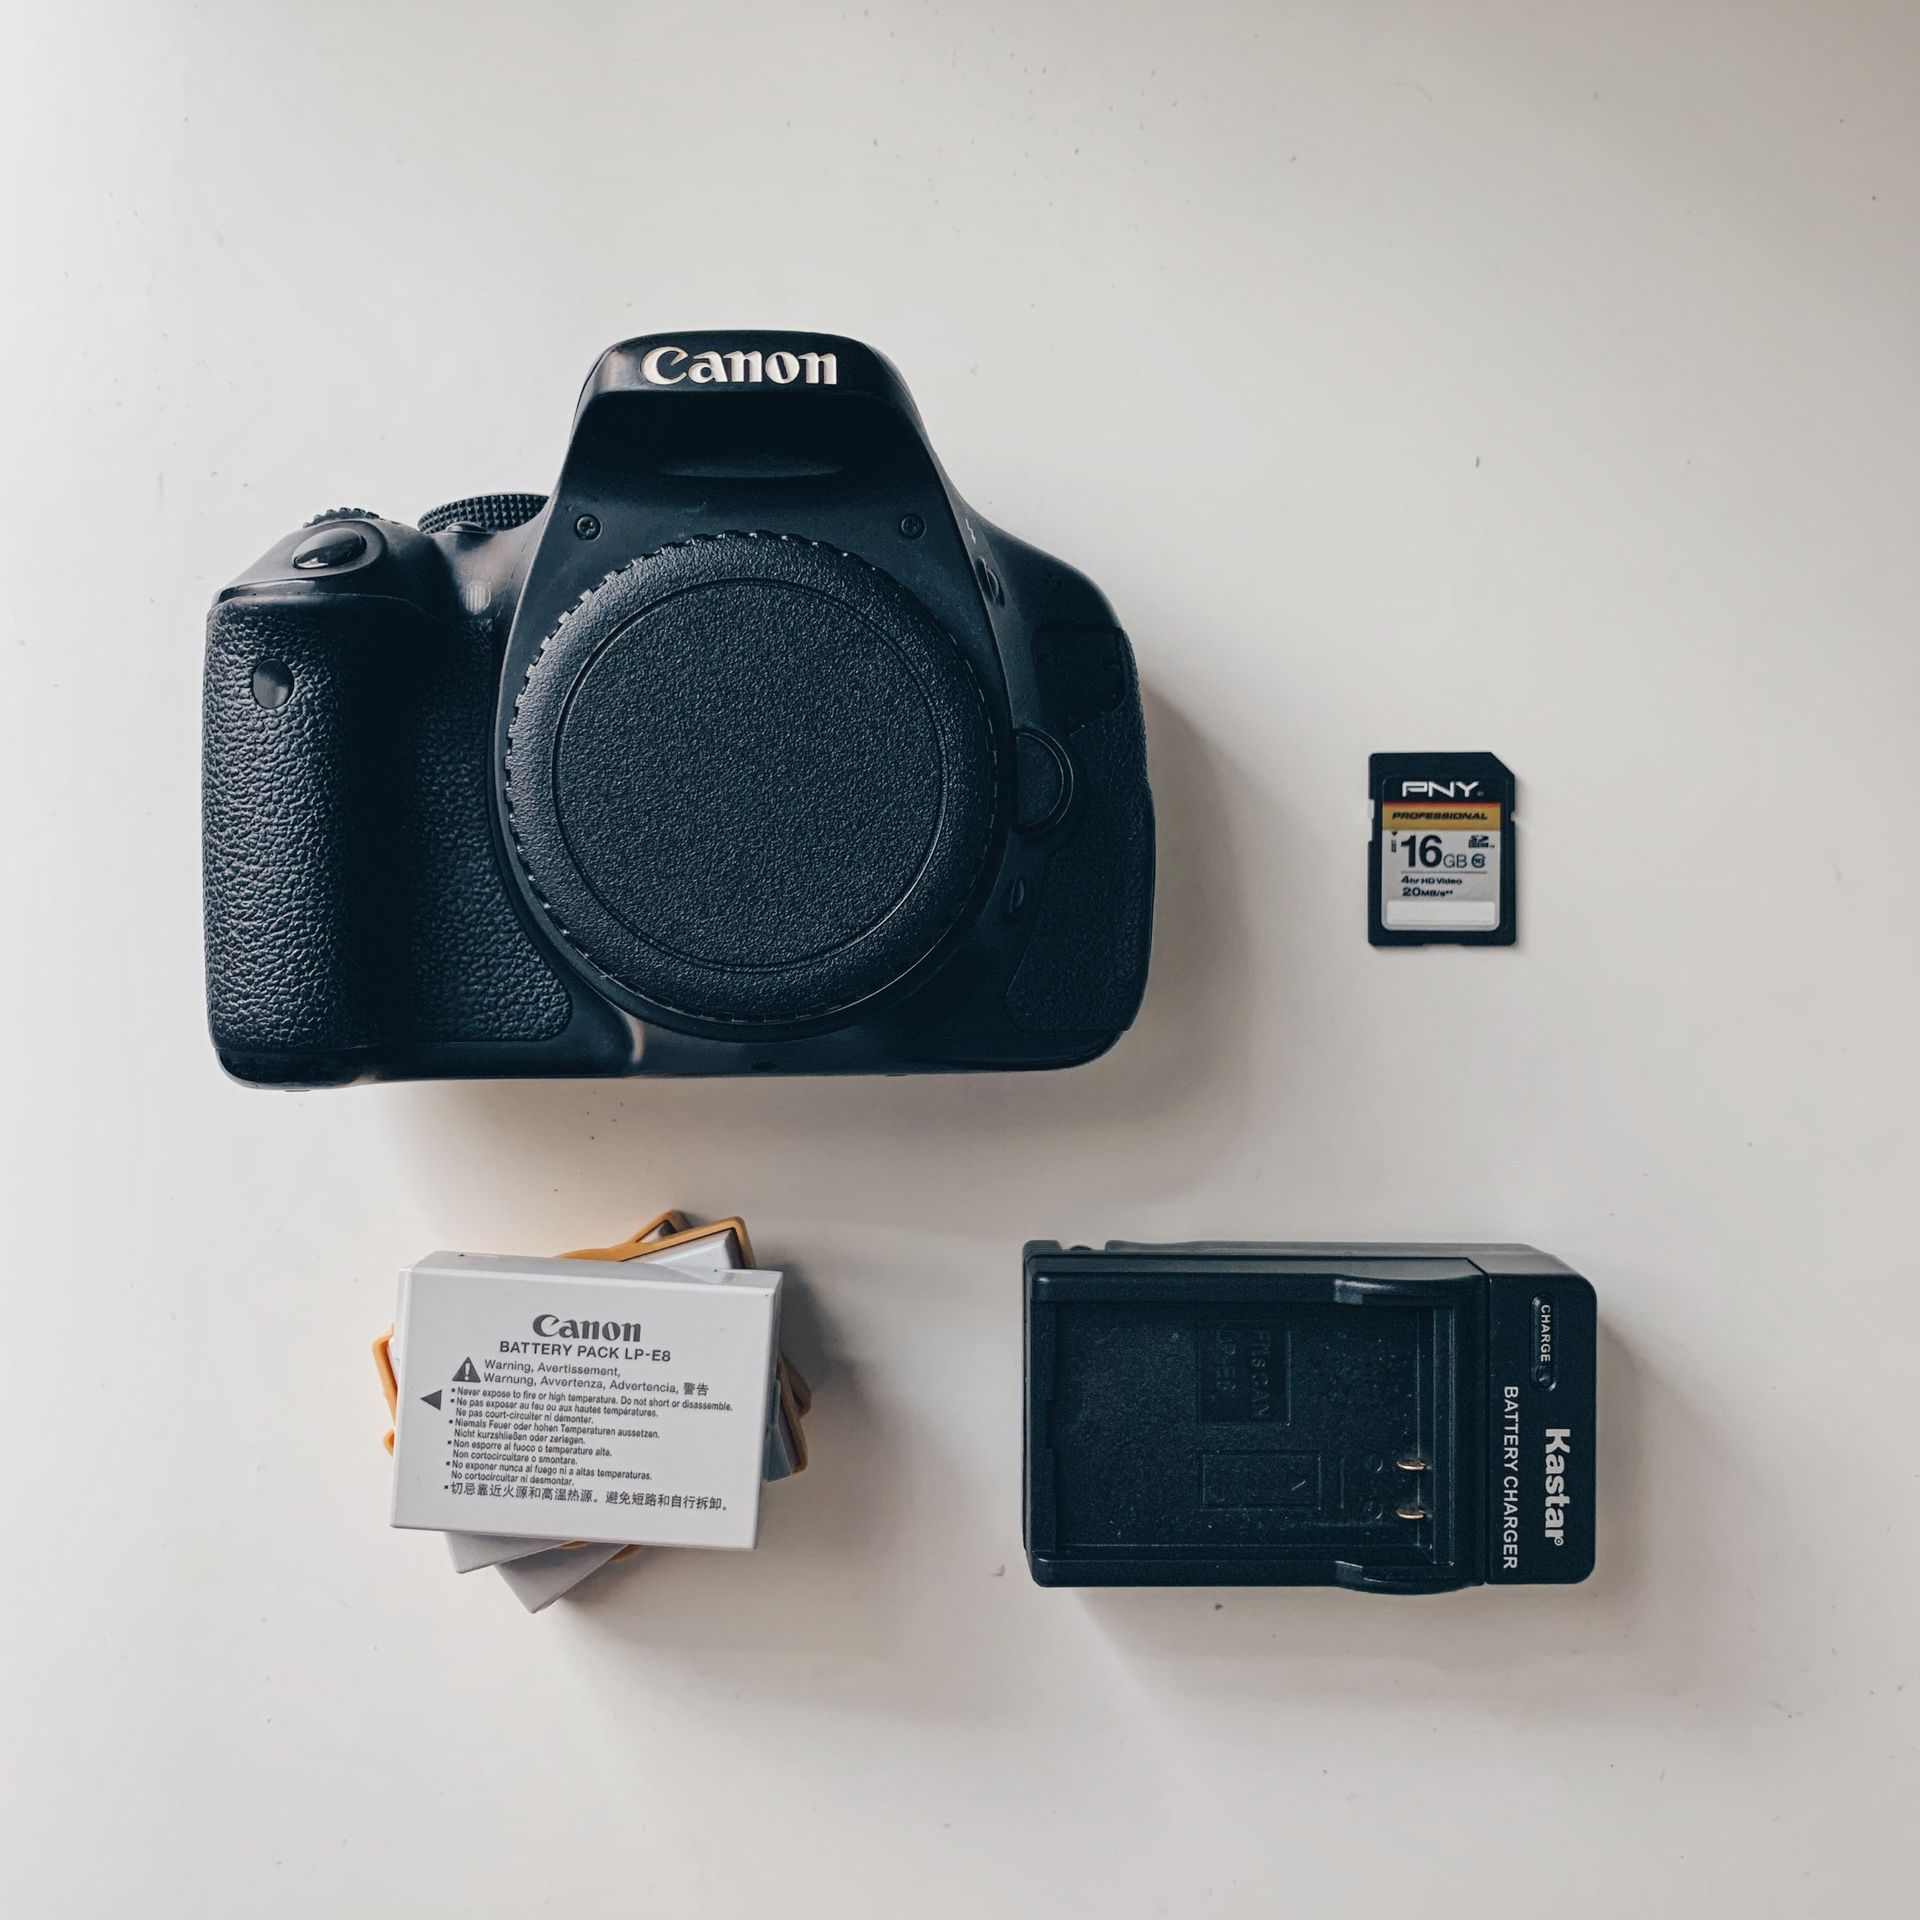 Canon EOS Rebel T3i, 3 batteries, charger, SD card